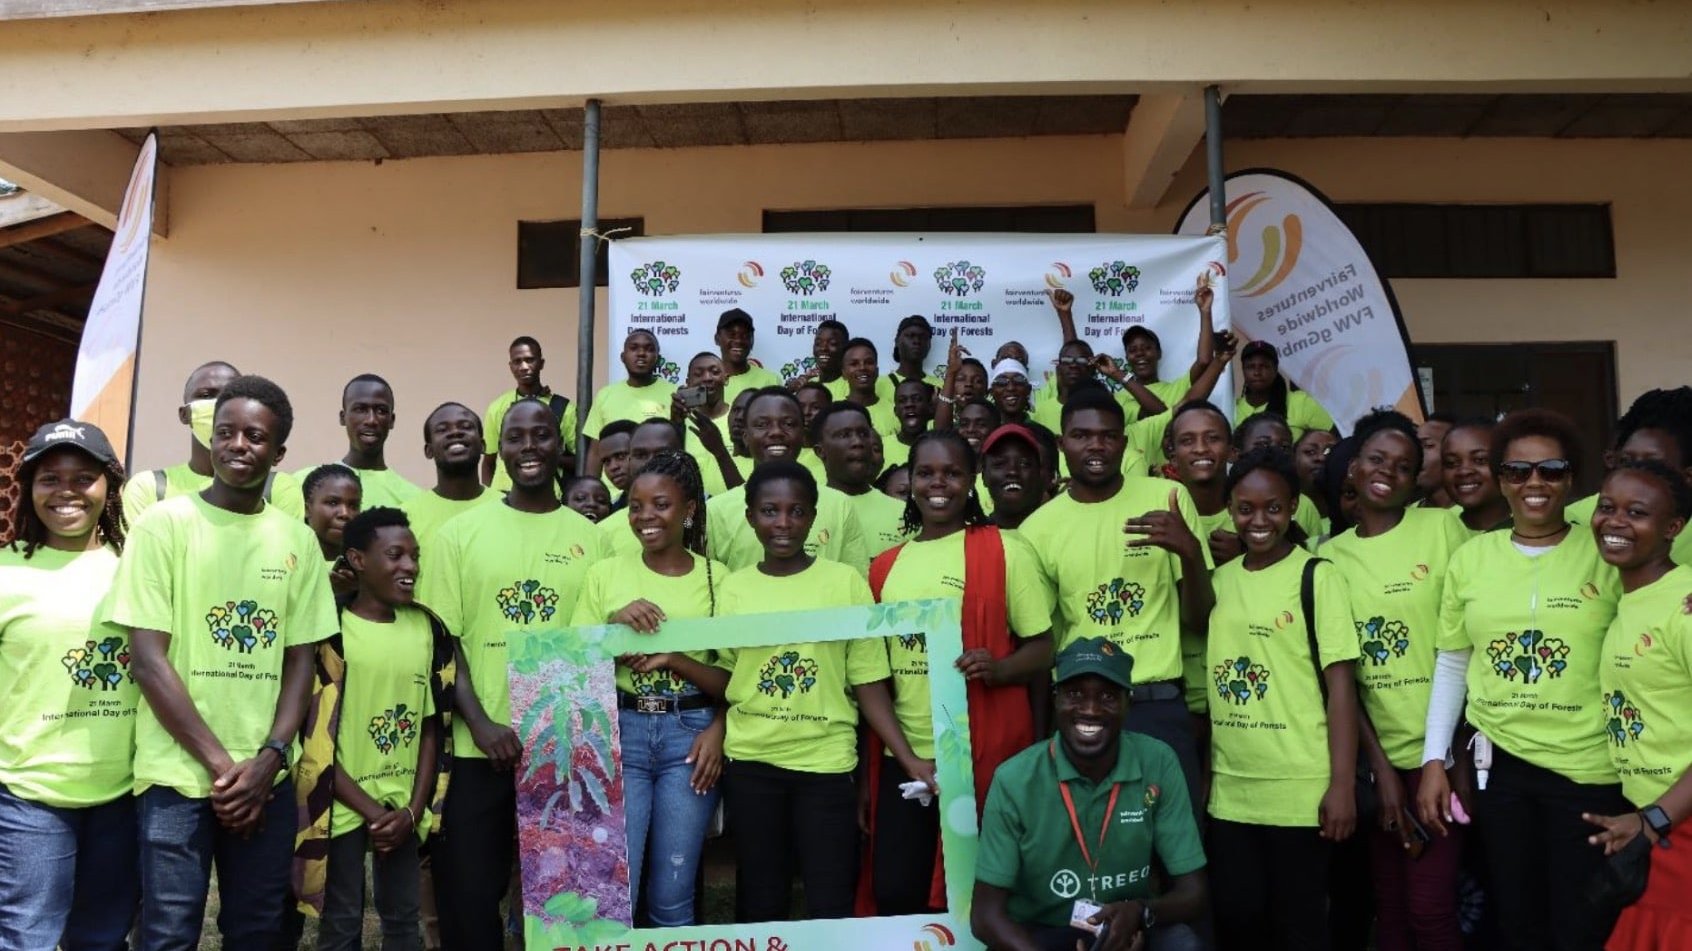 young group of people in neon yellow project t-shirts pose on international forest day